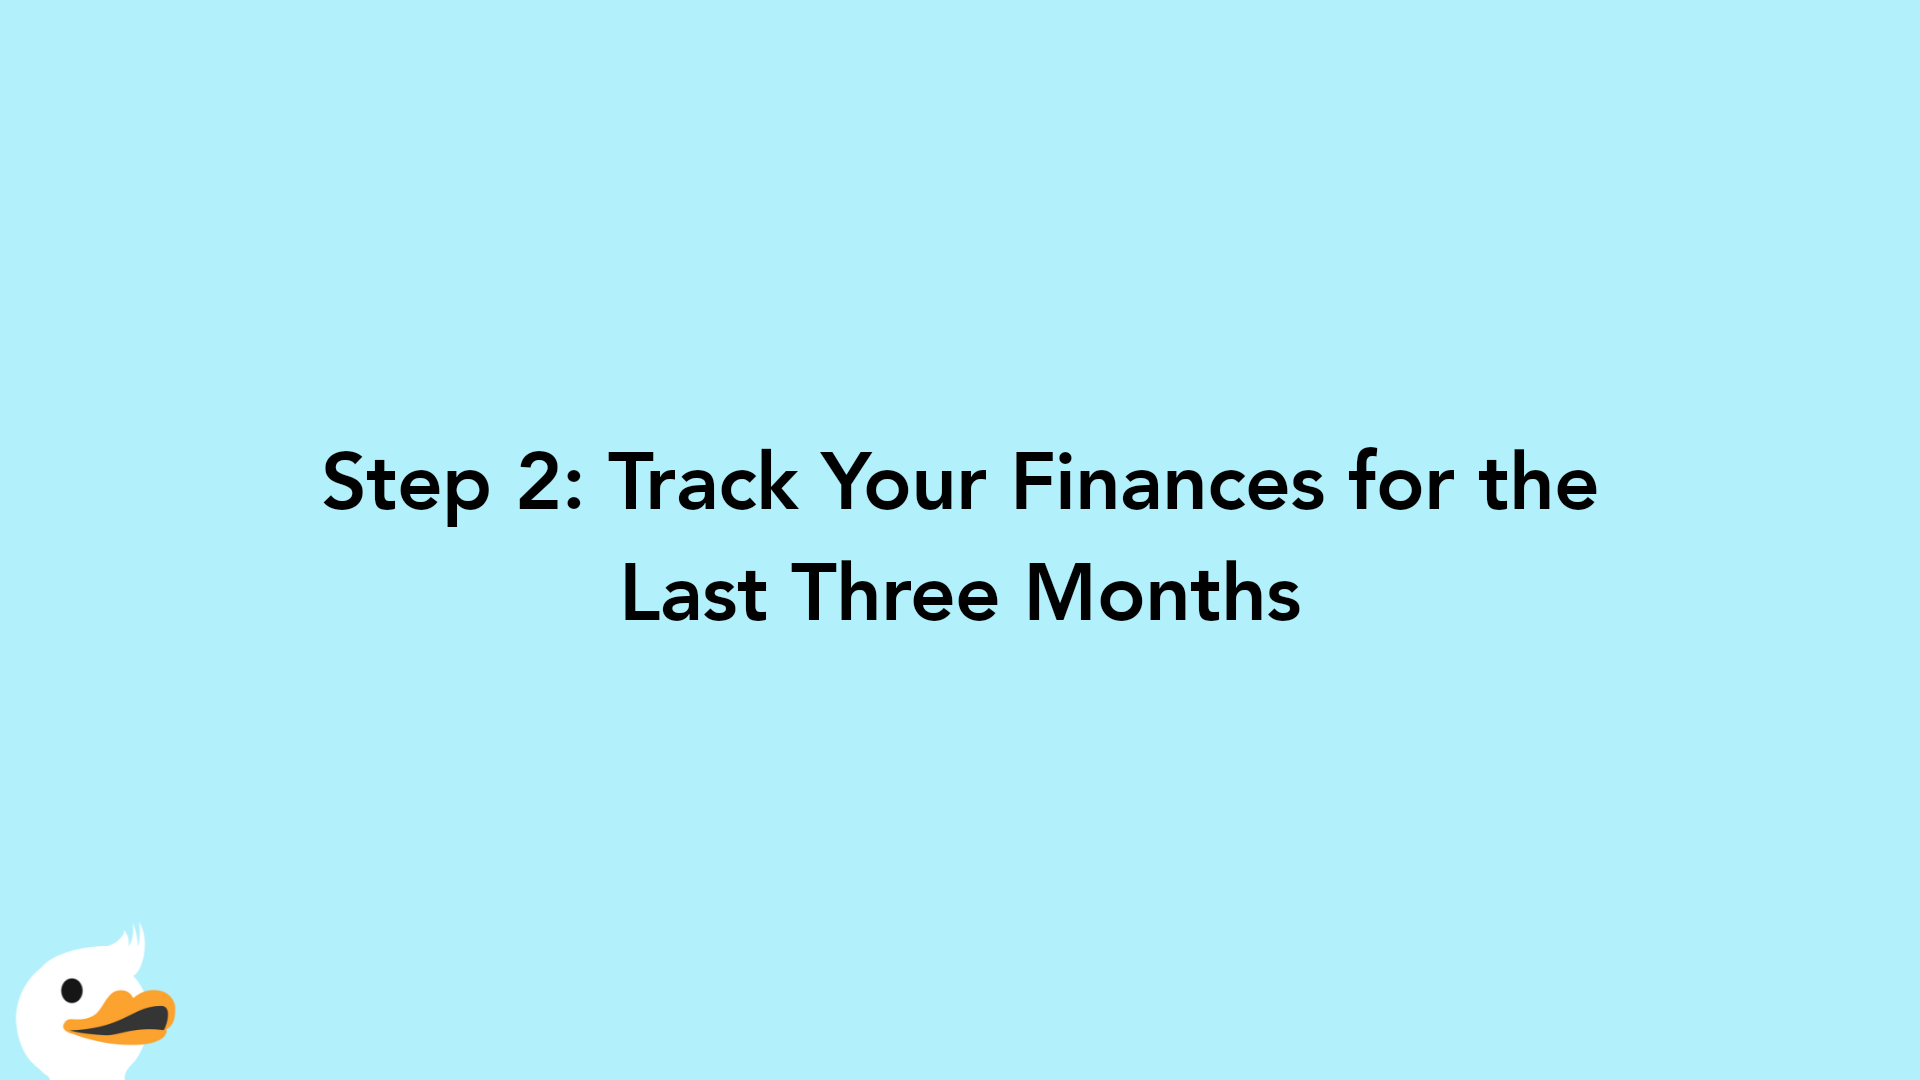 Step 2: Track Your Finances for the Last Three Months